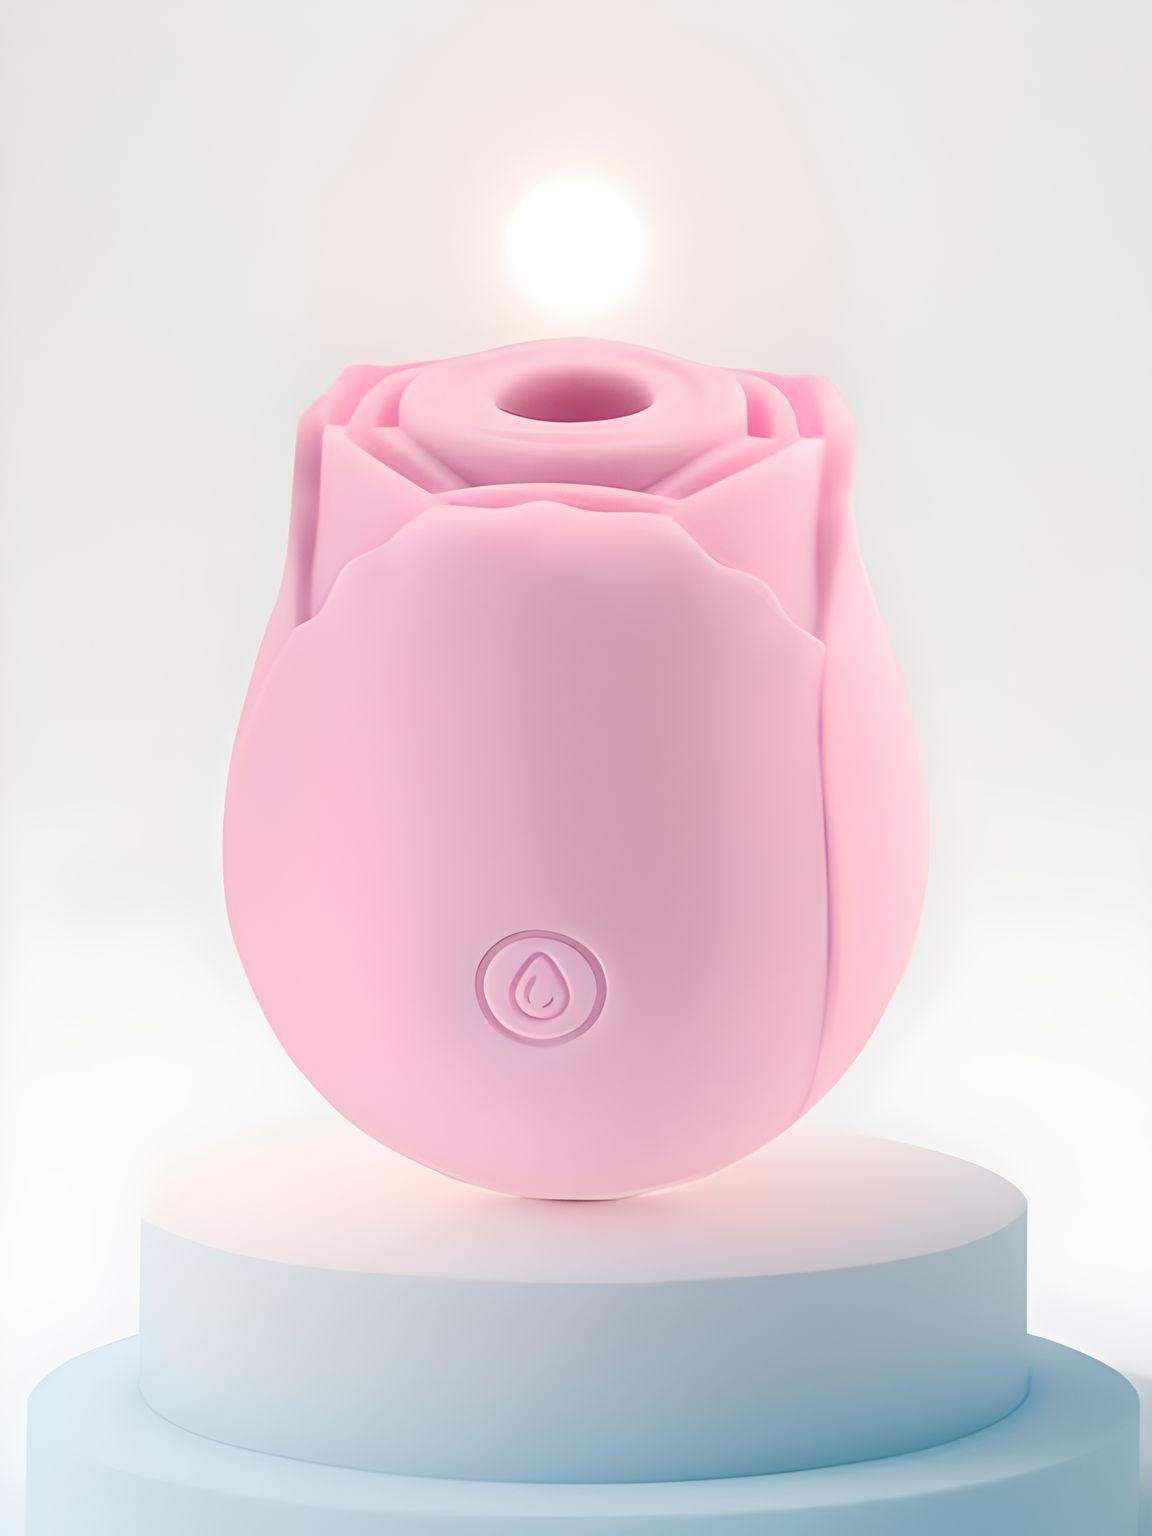 a pink object sitting on top of a white pedestal